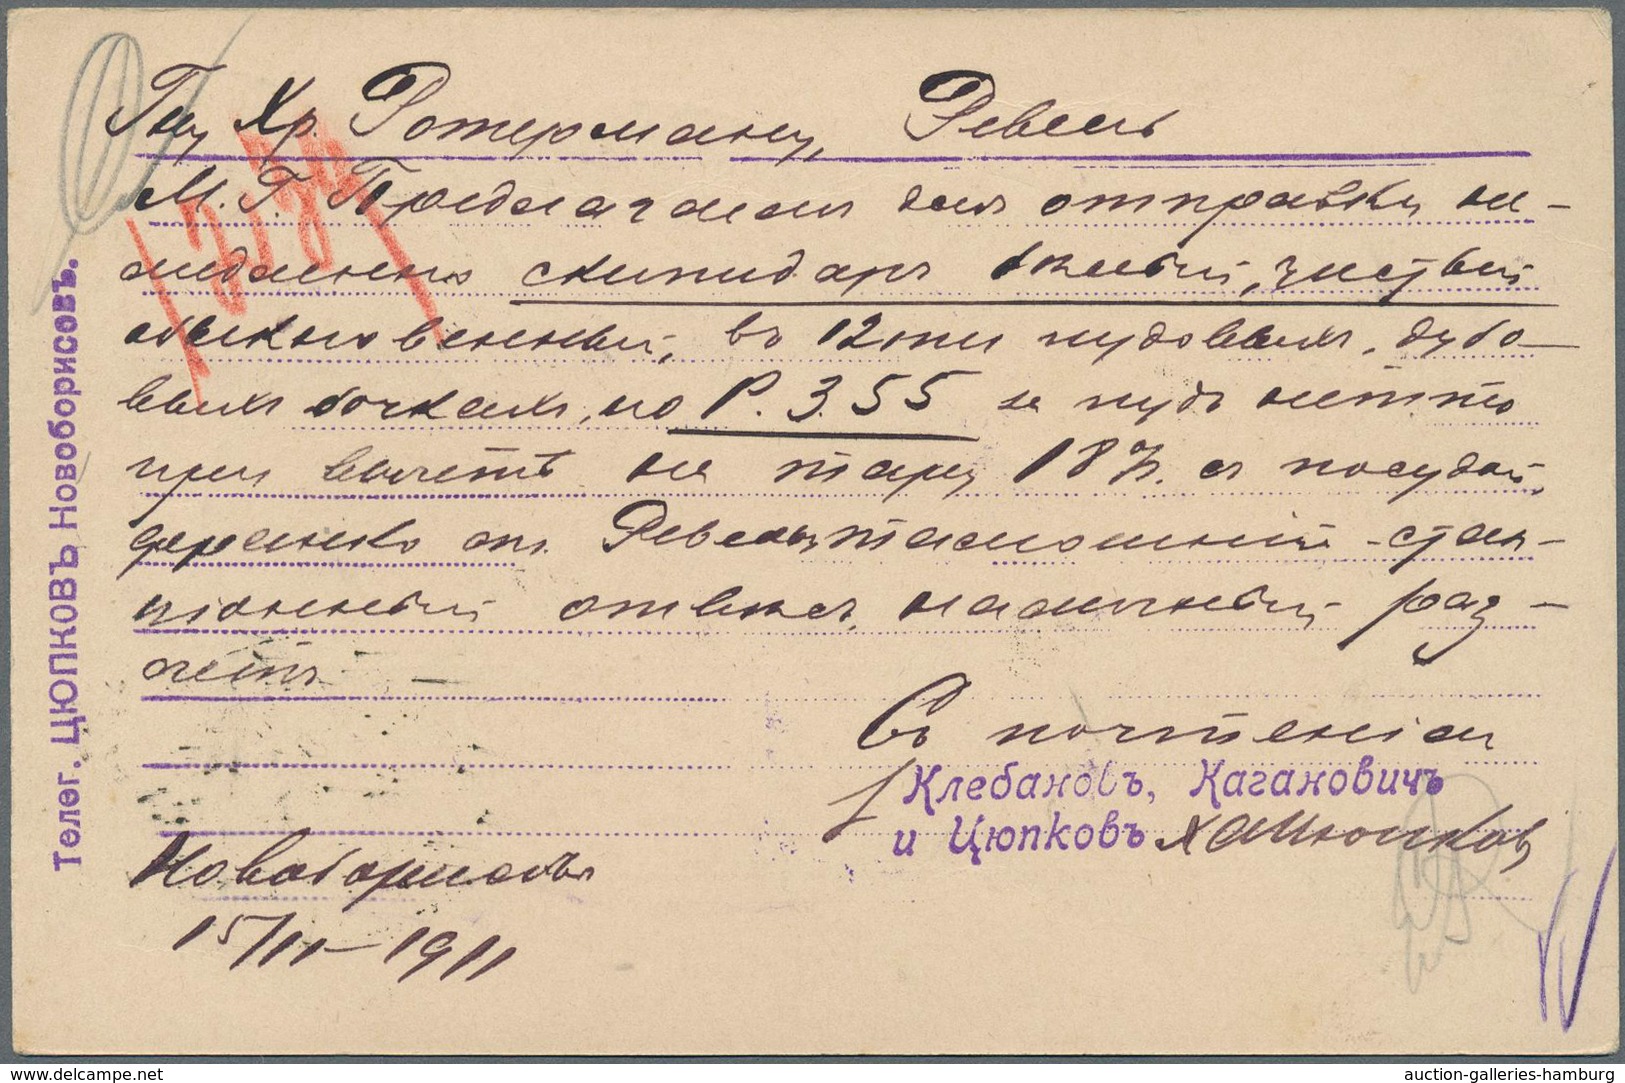 Russland: 1874/1913 Scarce Group Of 14 Items All Canceled By Cachets Of TPO-LINE 41-42 And 42-41 Mos - Briefe U. Dokumente